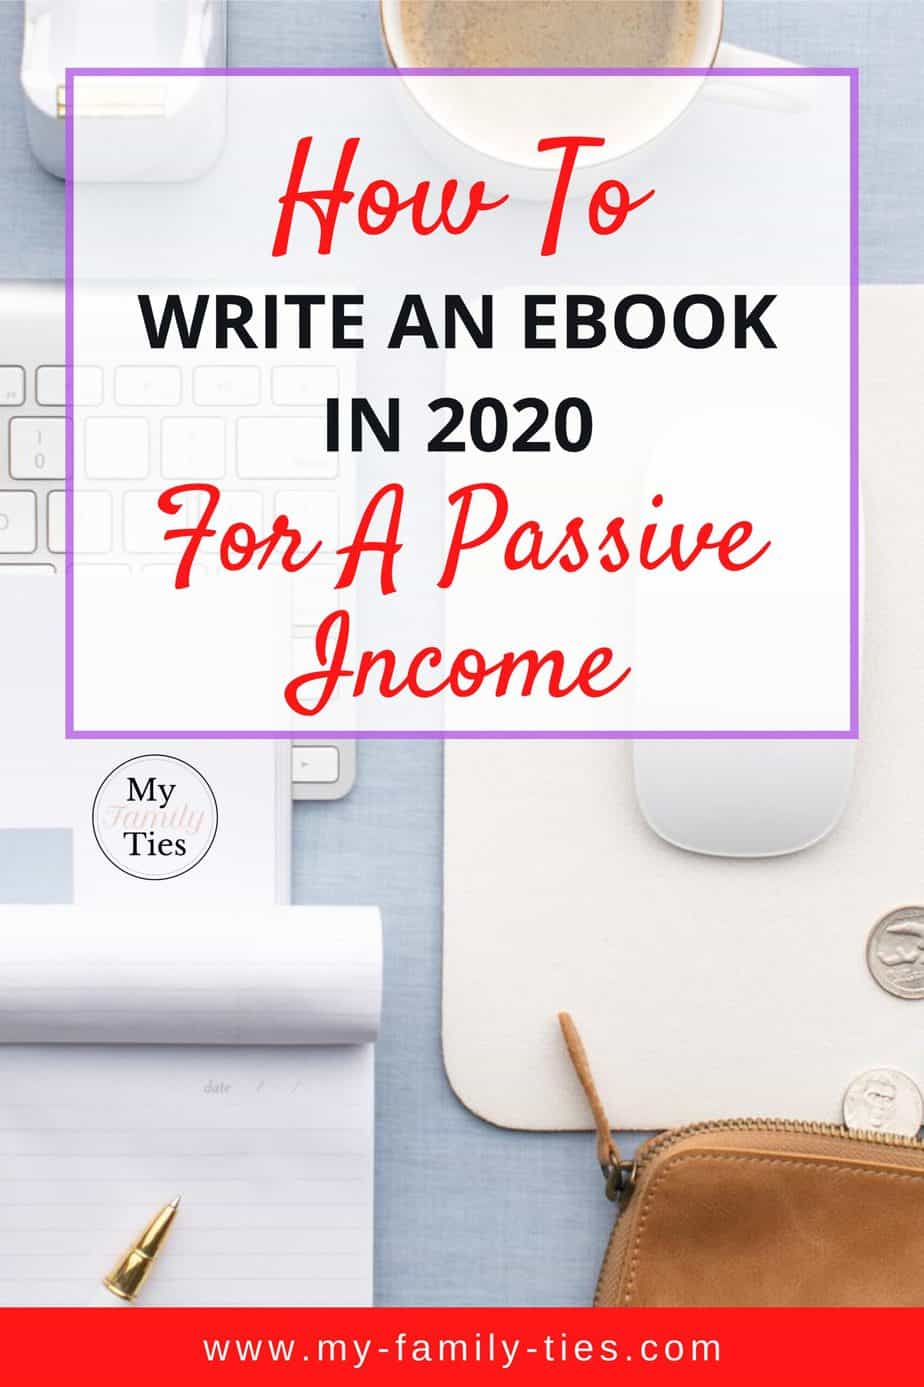 How to Write an eBook for A Passive Income. Have you ever wondered how to create an ebook? Here are tips and ideas to create your own in 2020 for a passive income | My Family Ties